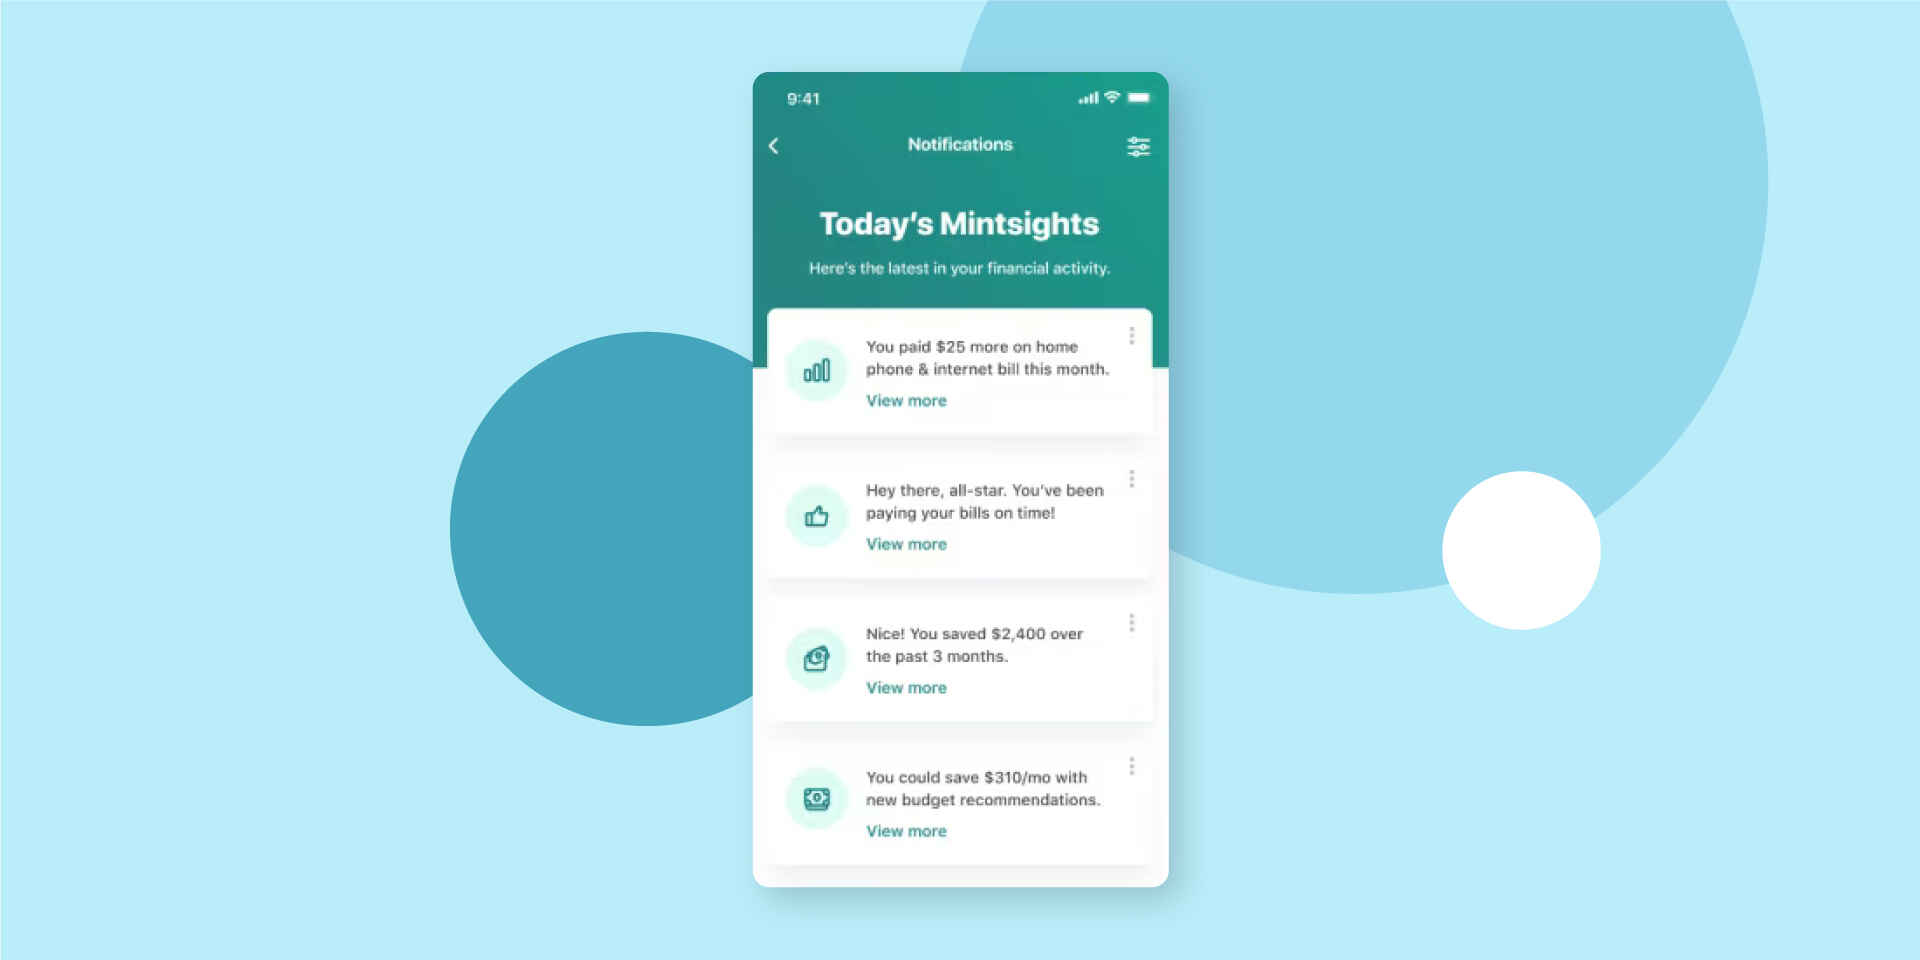 The Mint app notifies users with valuable financial insights and analytics.